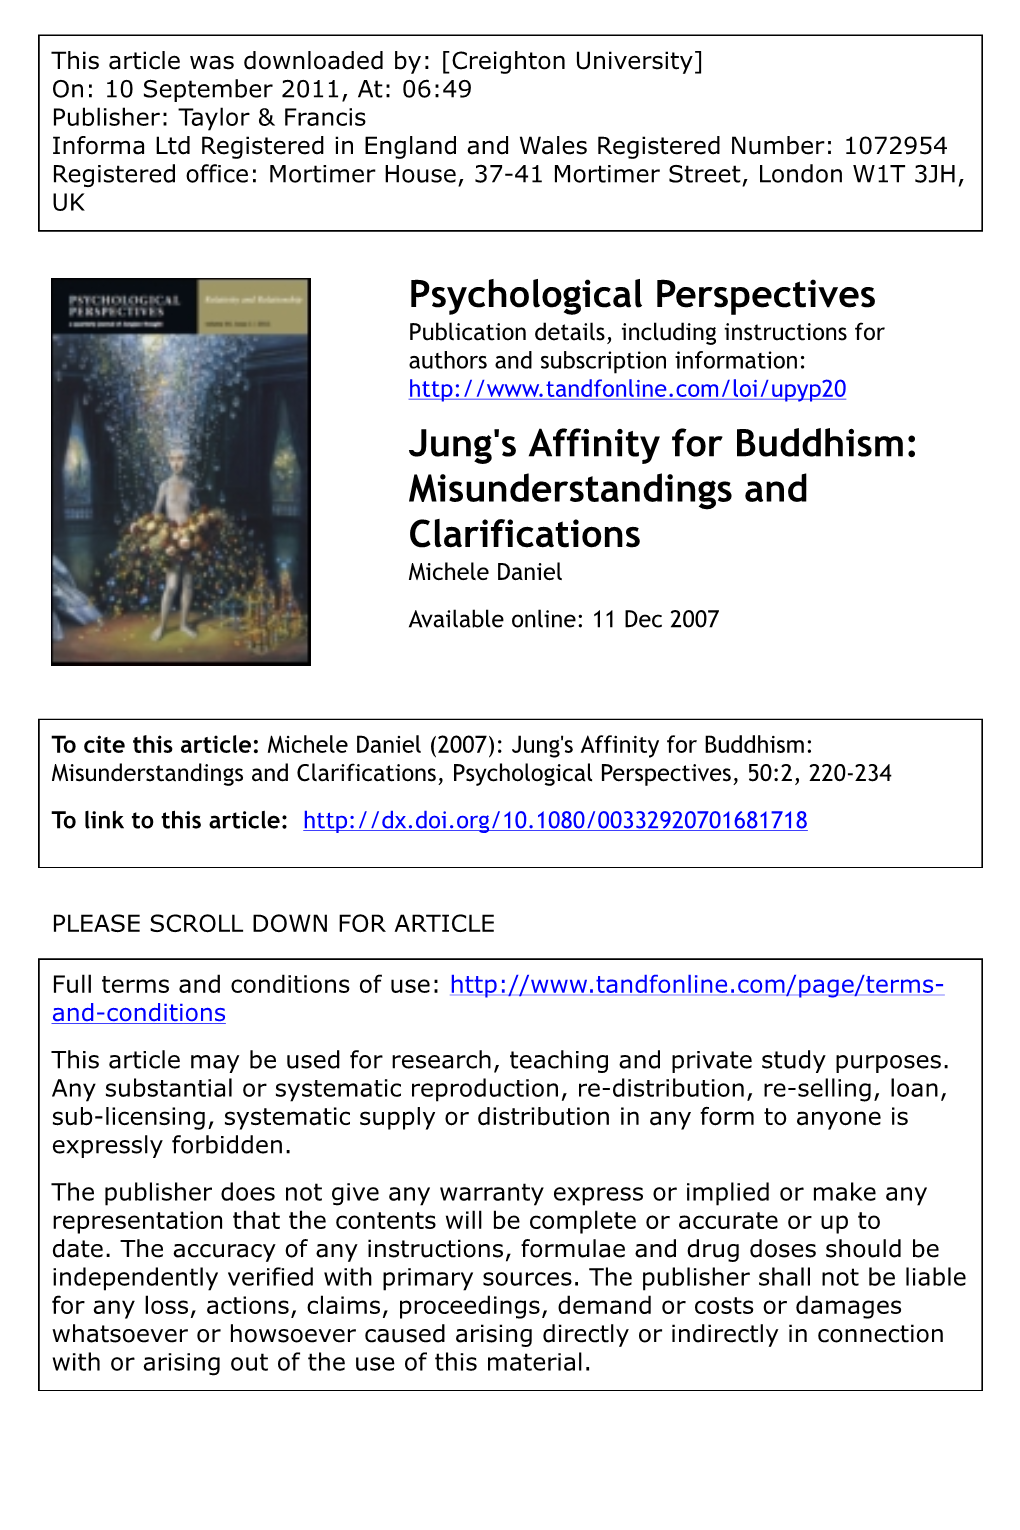 Jung's Affinity for Buddhism: Misunderstandings and Clarifications Michele Daniel Available Online: 11 Dec 2007